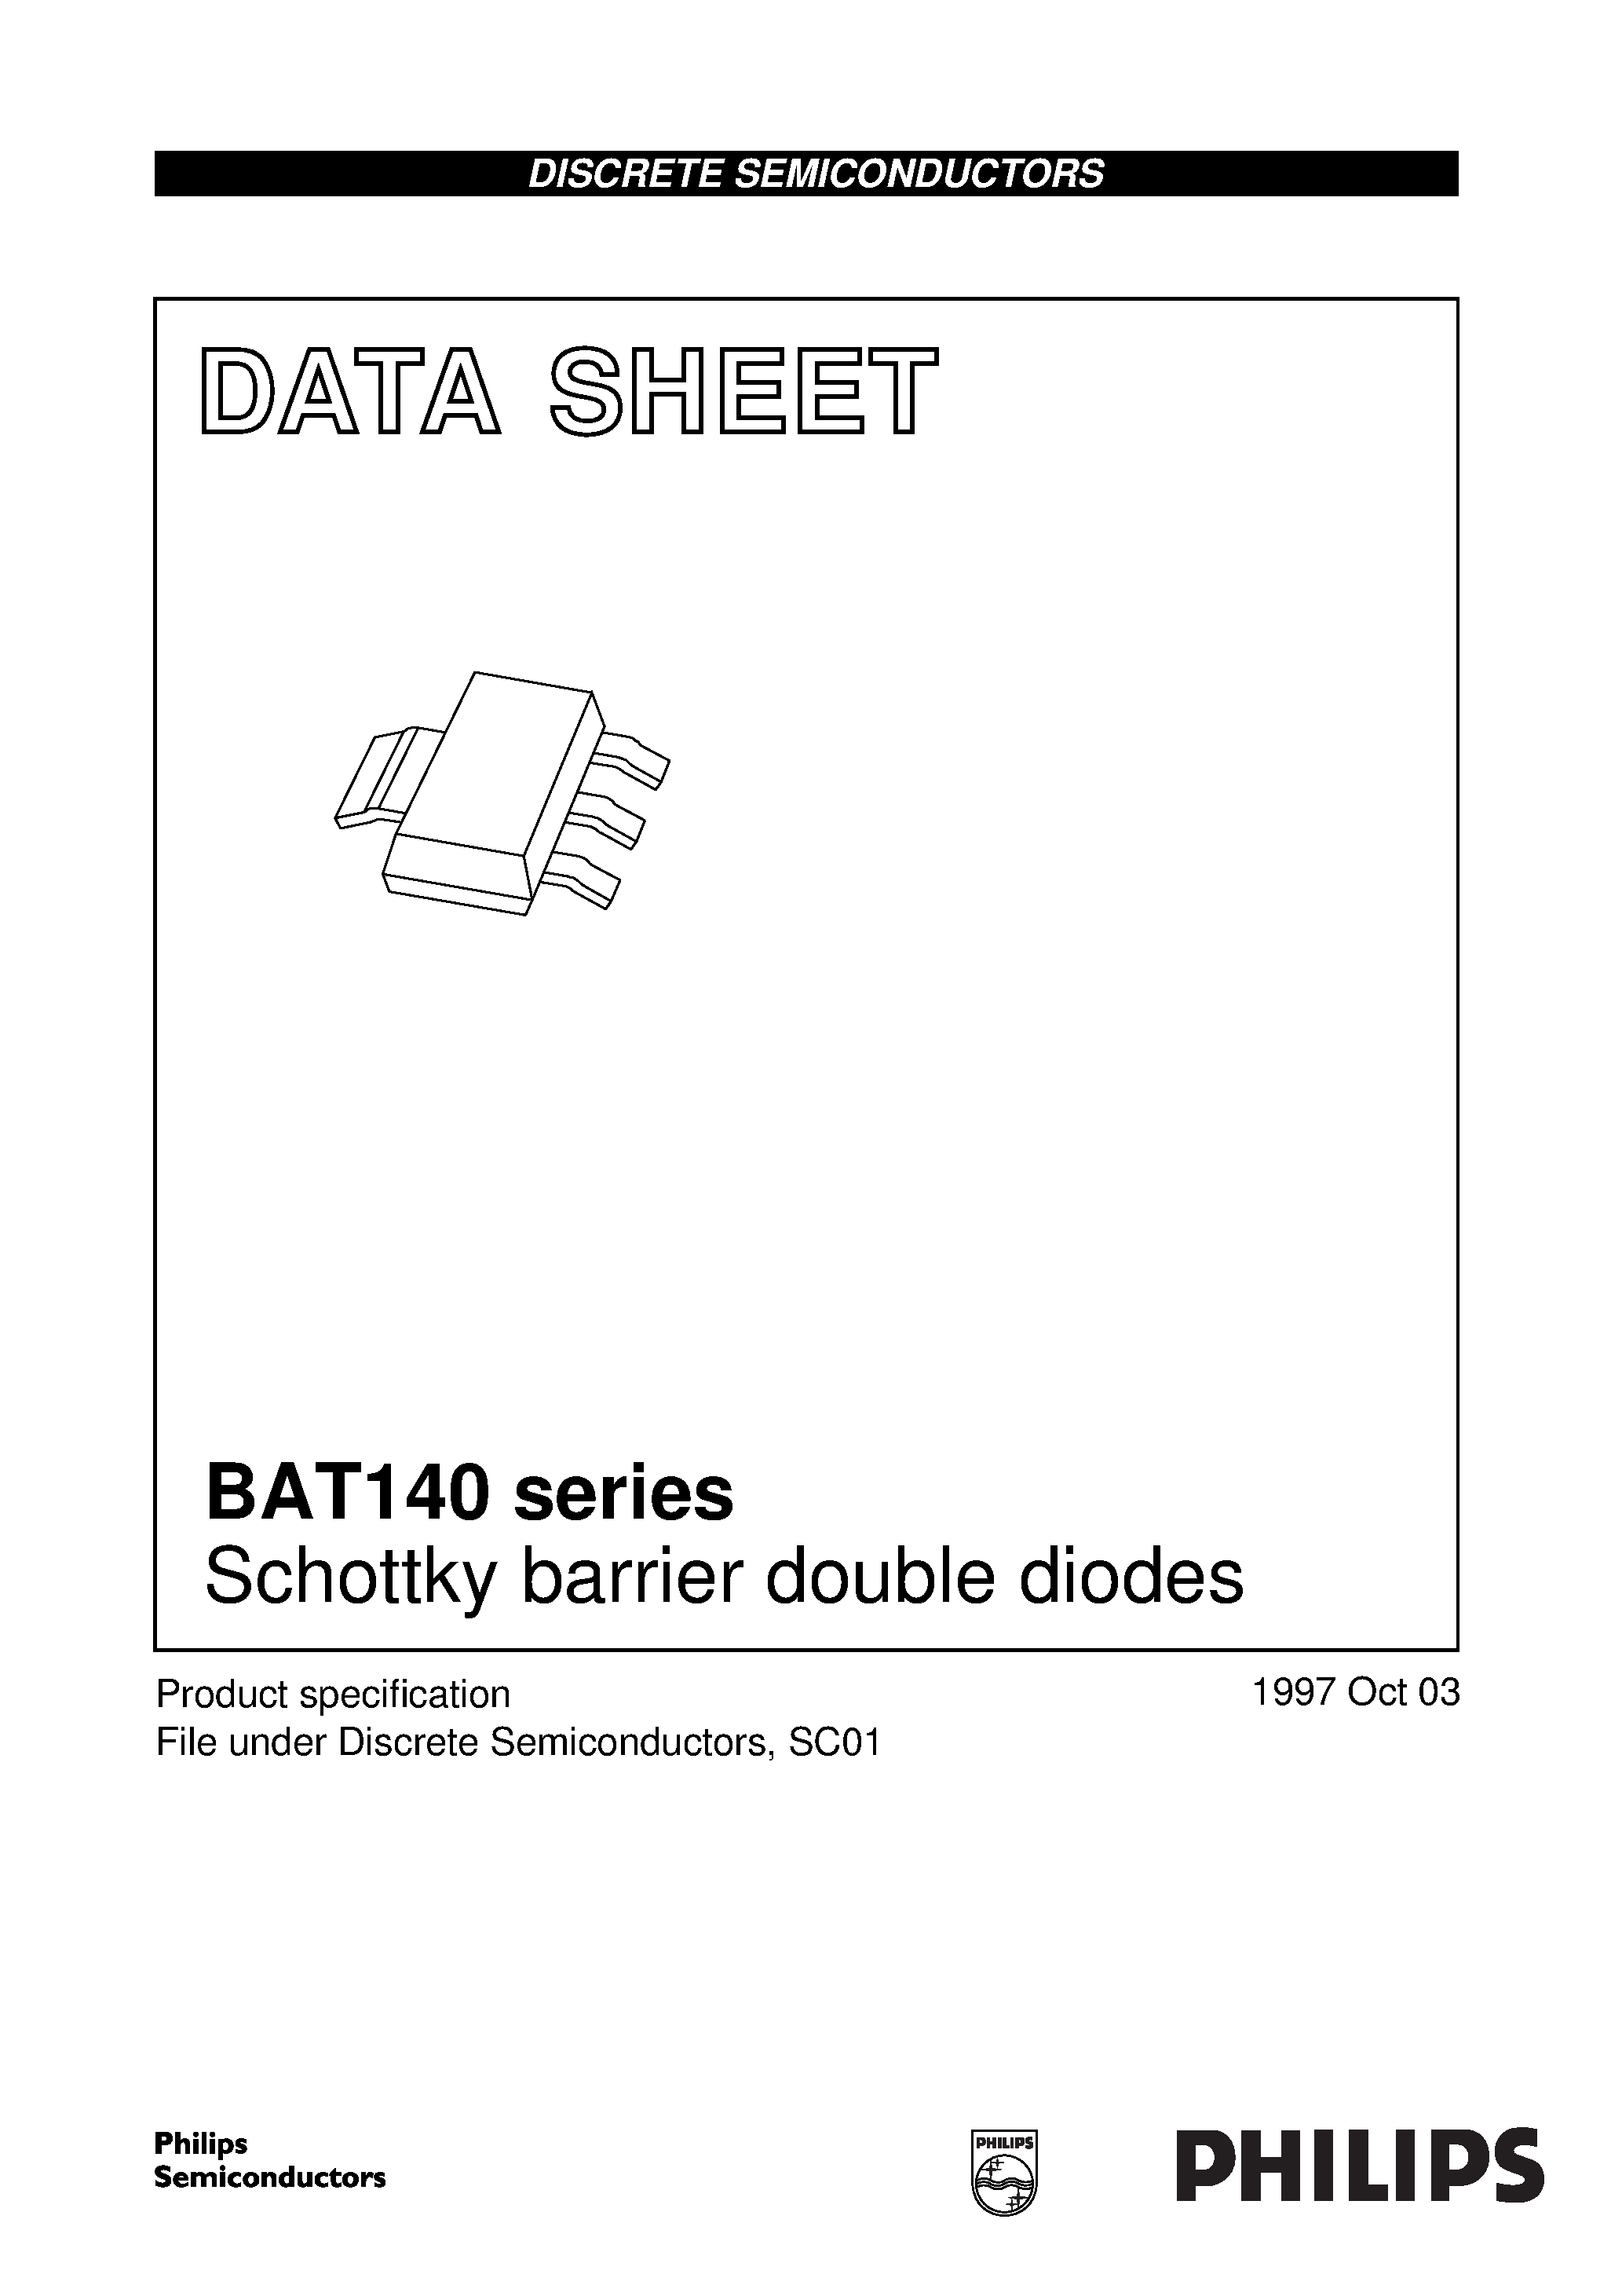 Datasheet BAT140S - Schottky barrier double diodes page 1